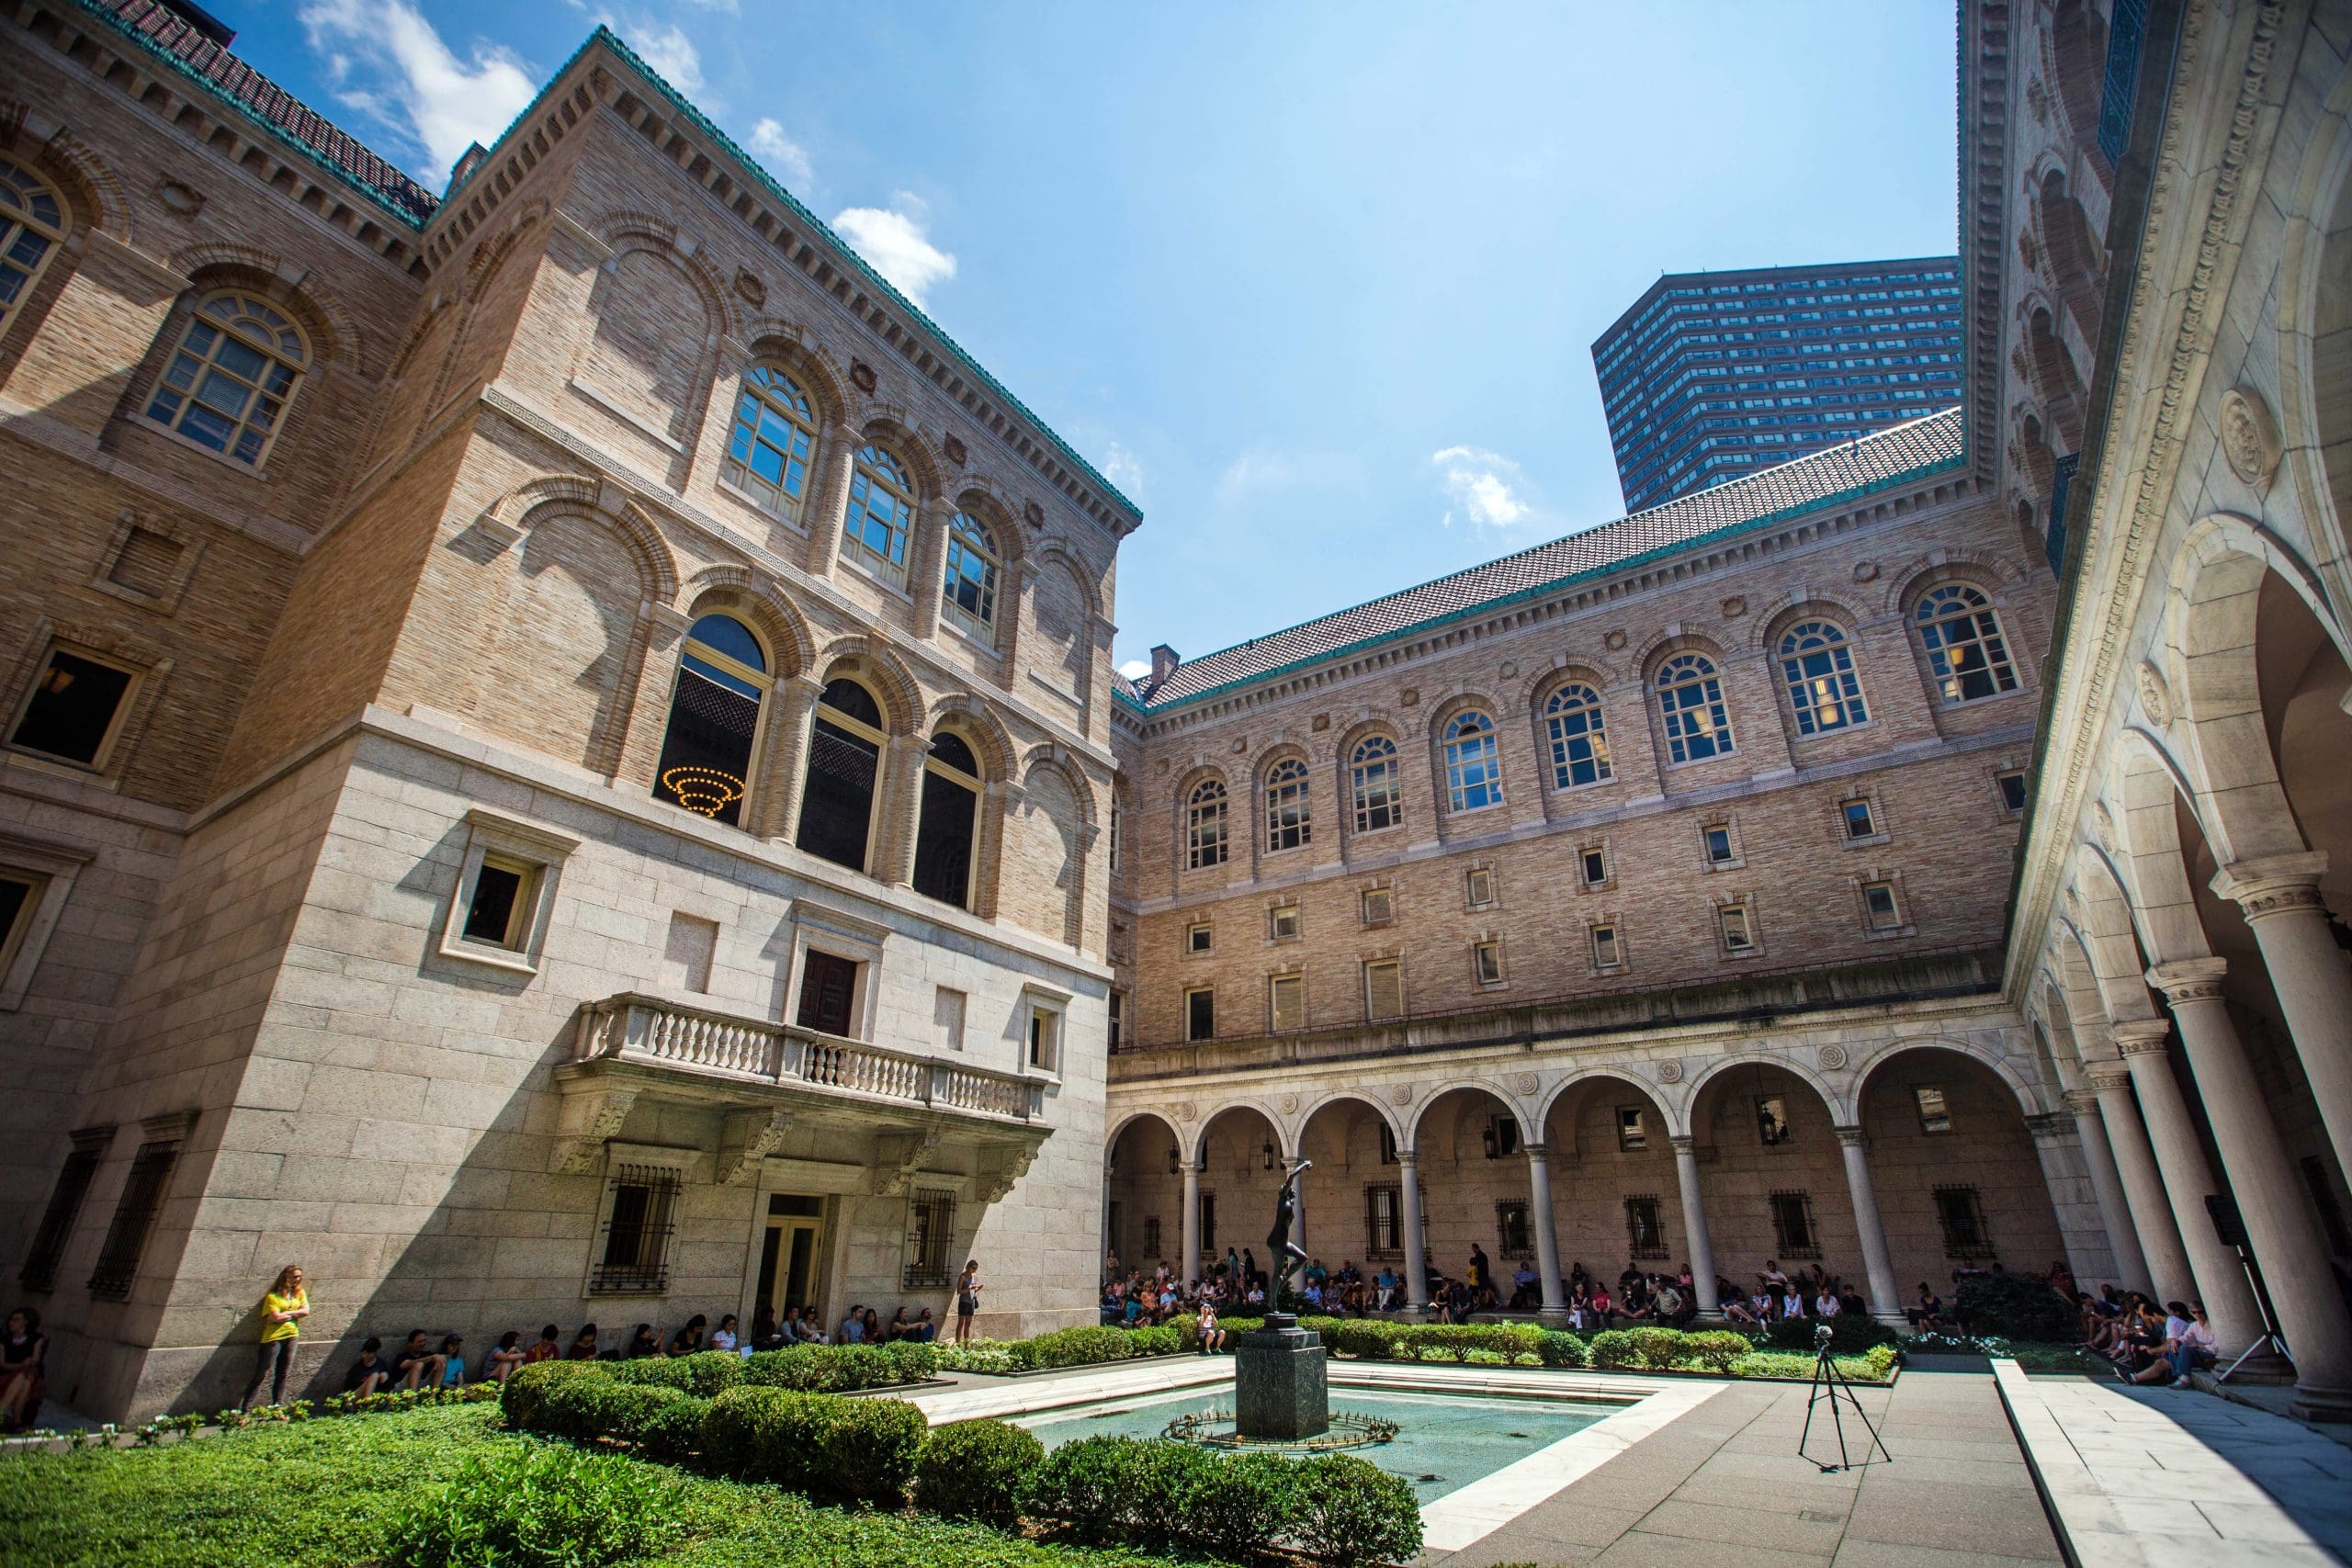 The courtyard of the Central Library in Copley Square is one of Boston's most beautiful havens from the hustle and bustle of the city.